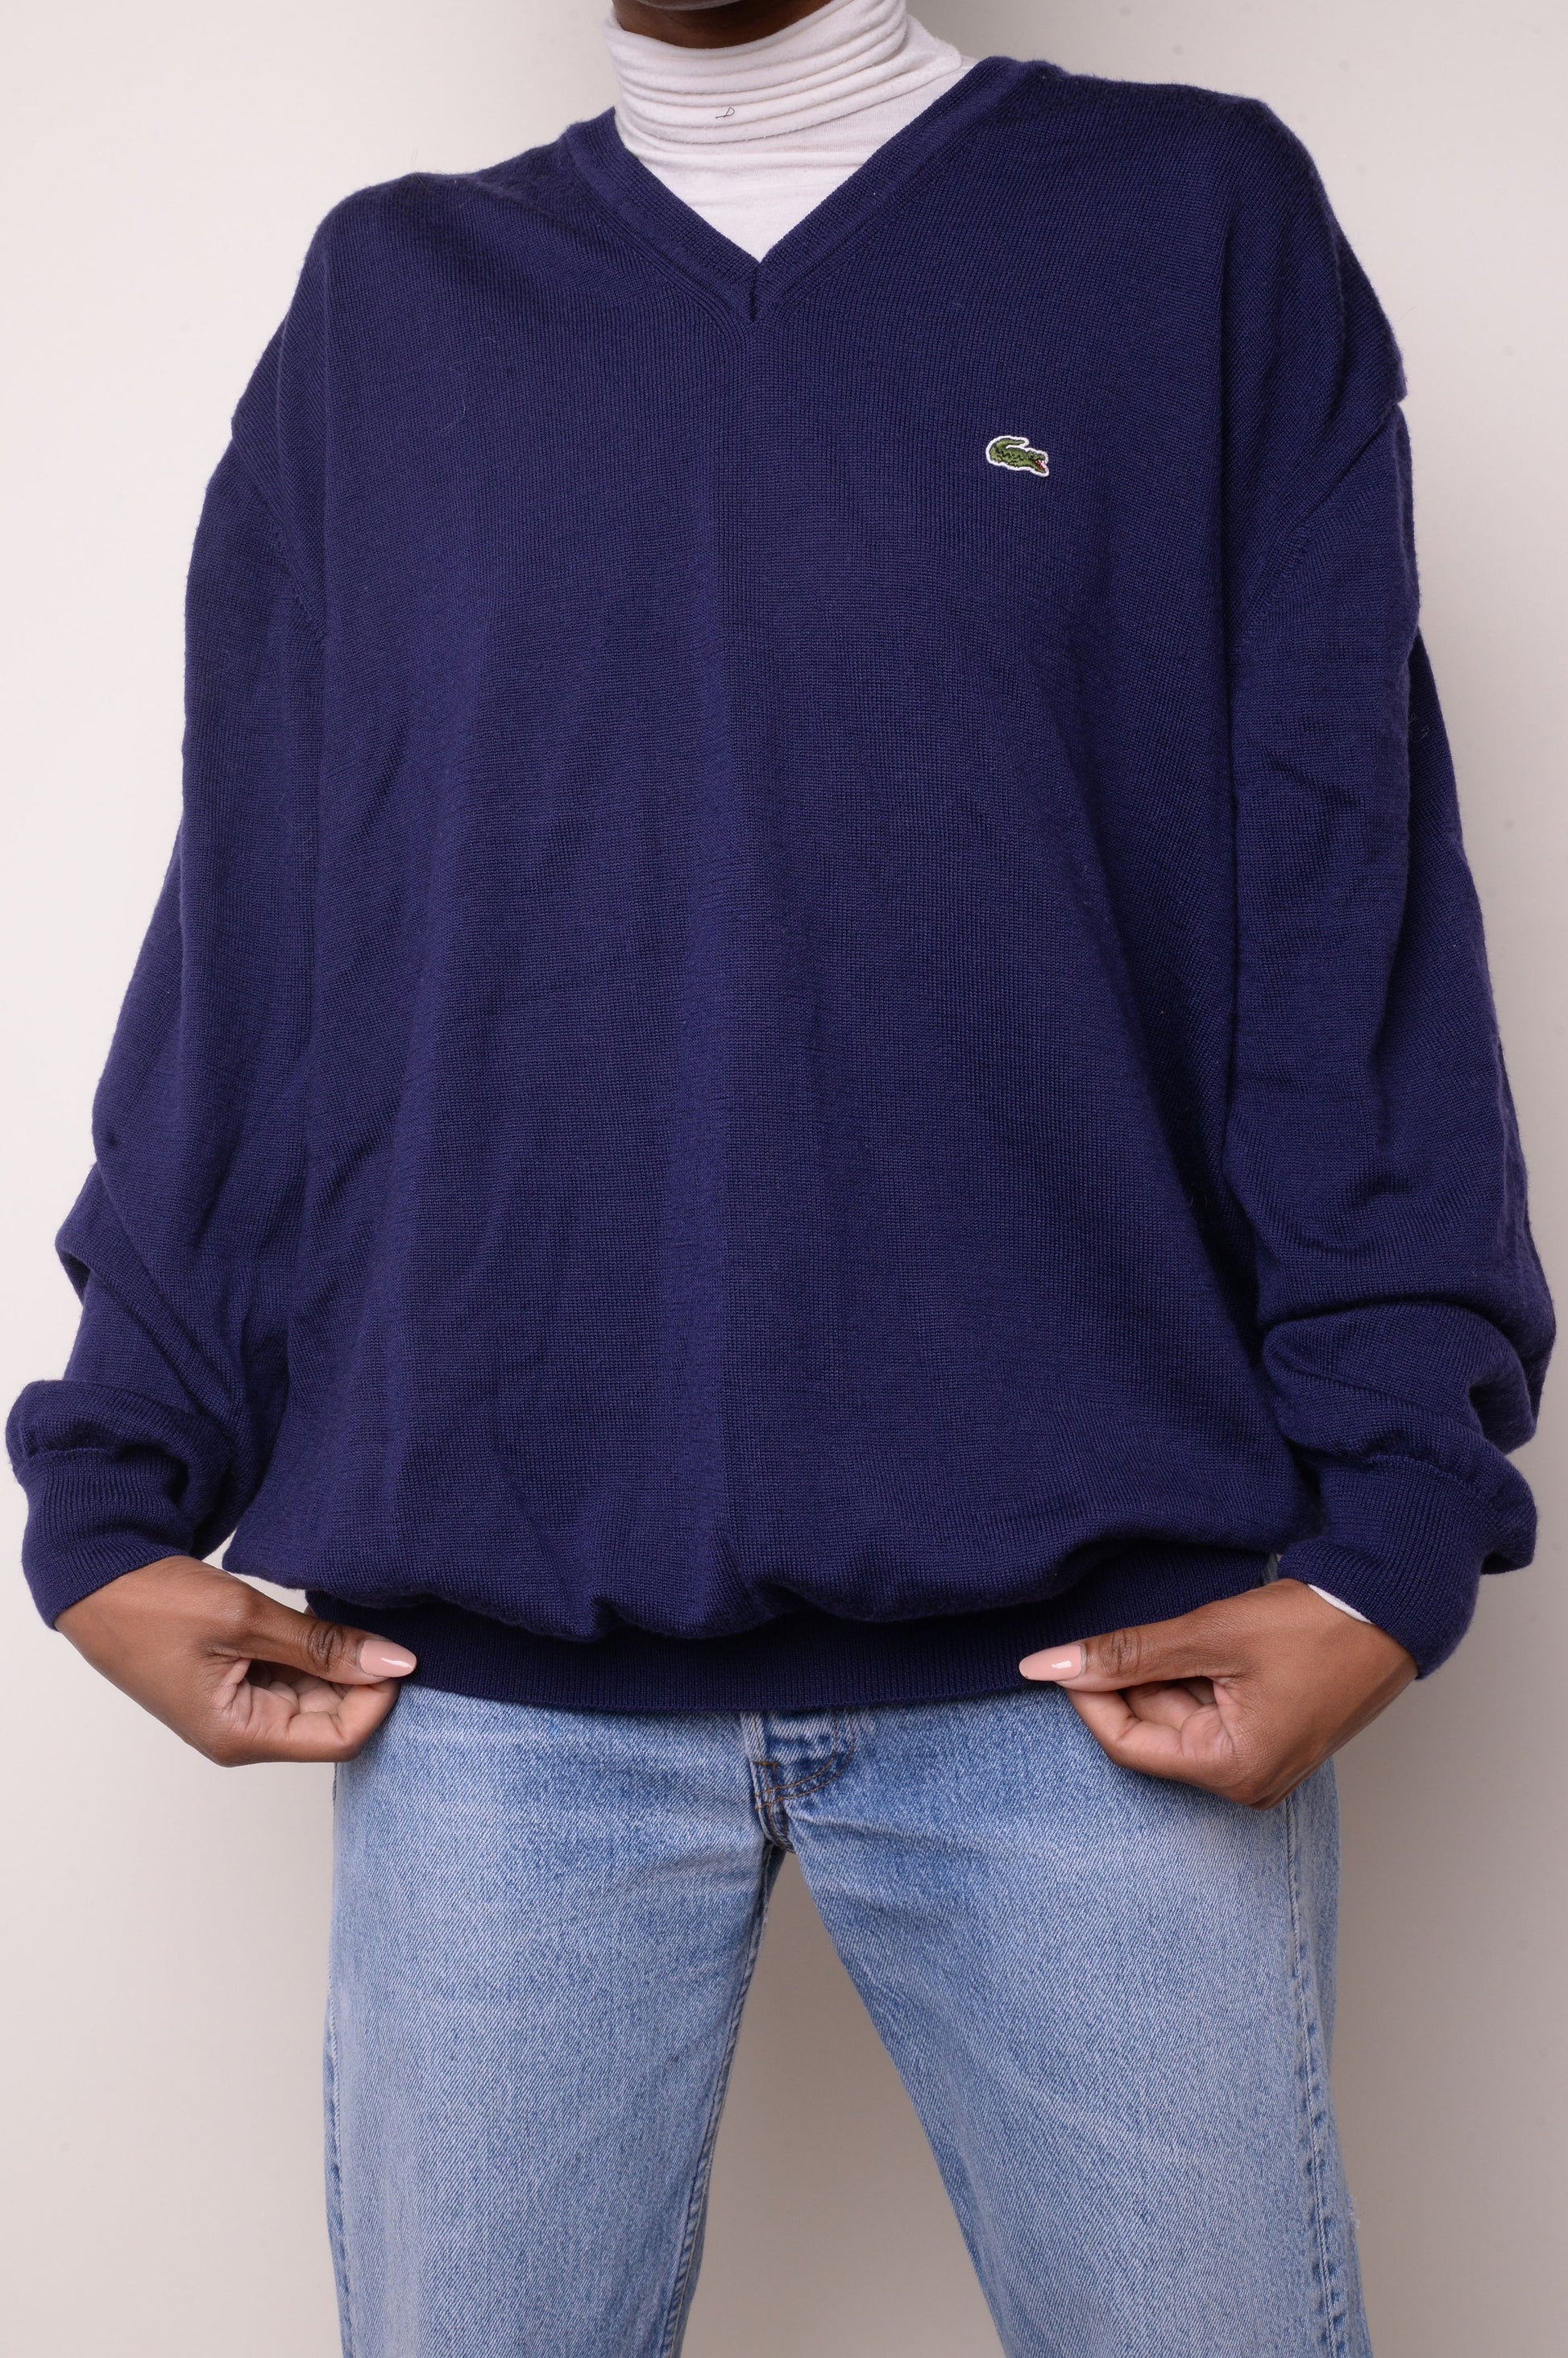 Navy Lacoste Sweater